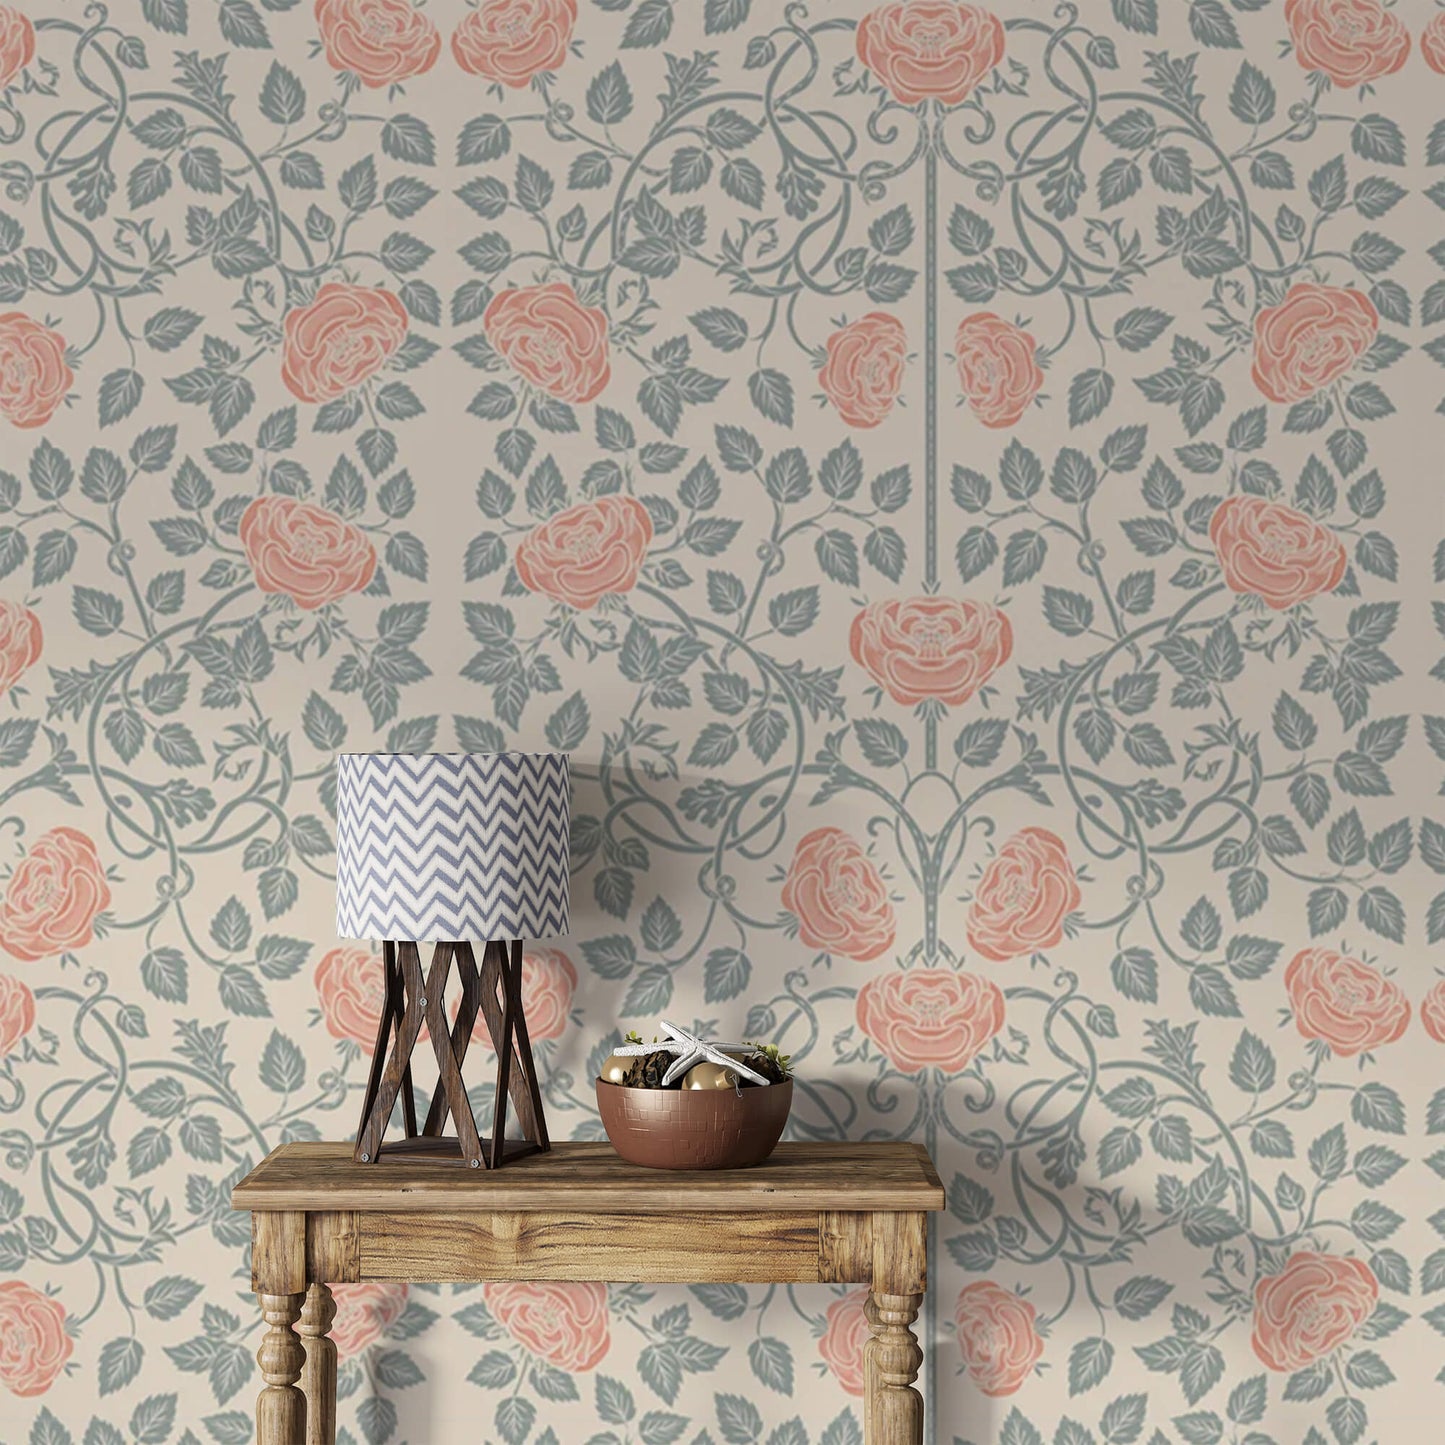 Vintage Rose Garden Wallpaper: Bring the timeless elegance of a rose garden into your home with this charming design, featuring delicate vintage-inspired roses in full bloom.